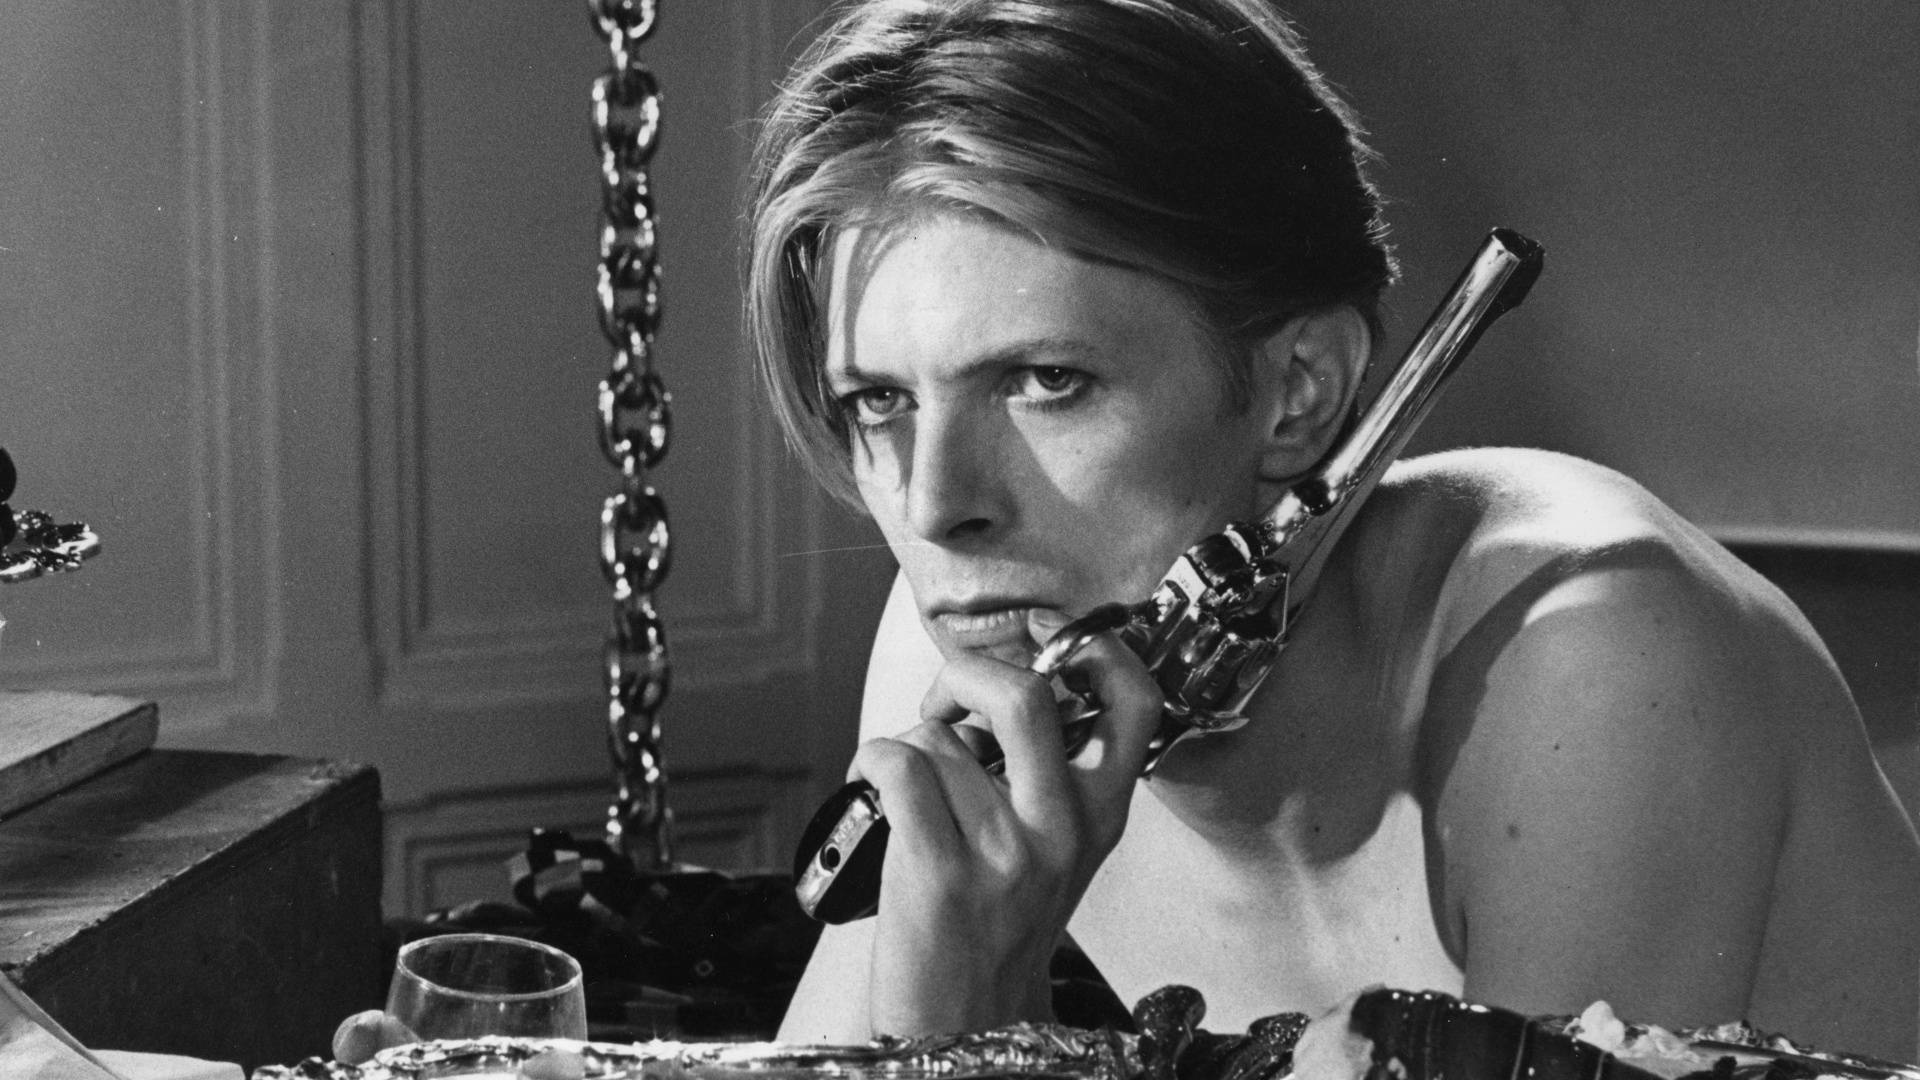 David Bowie With Pistol